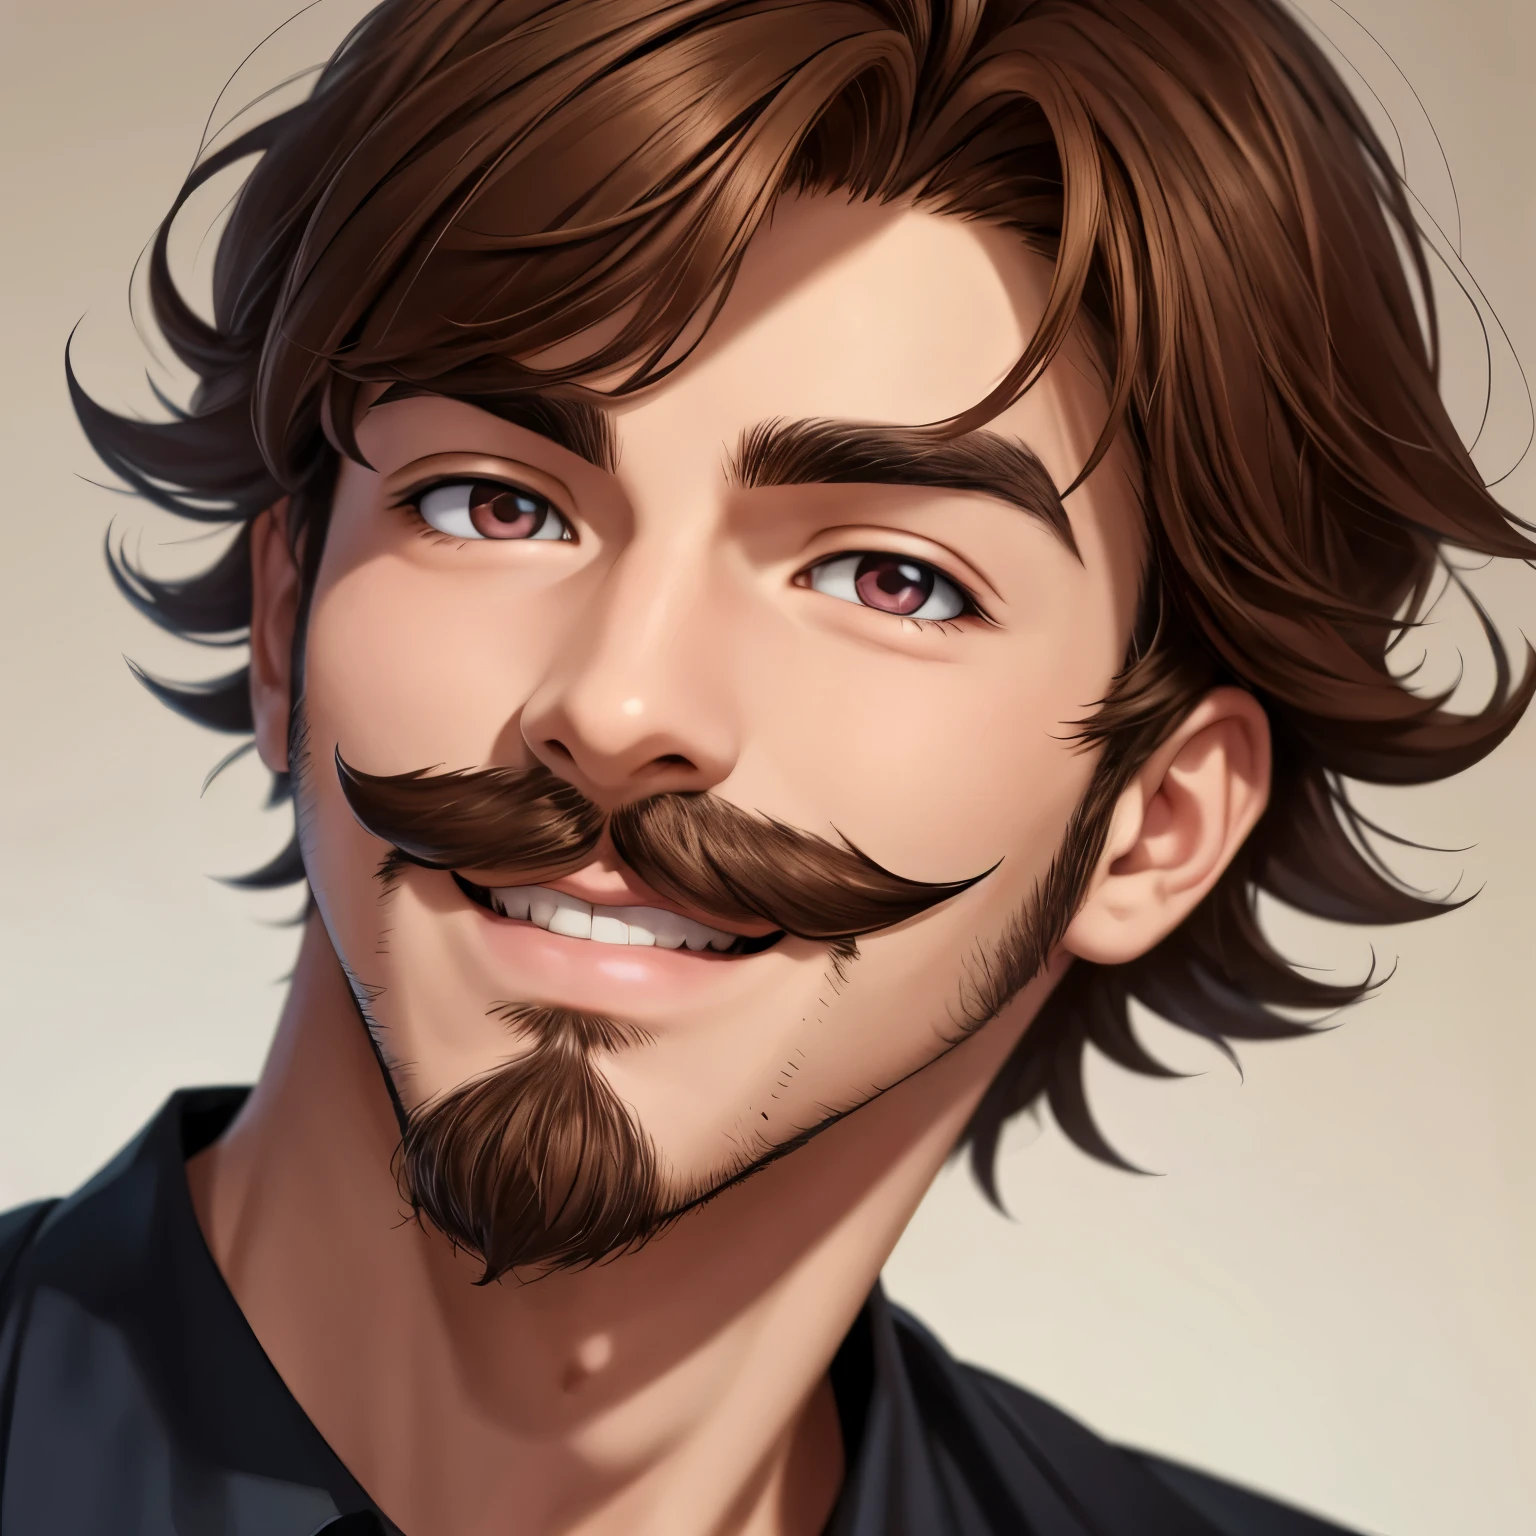 Anime male with nice brown hair and soft lovely eyes. He has a mustache and a goatee. He has pink lips and is smiling and enough to see his teeth.